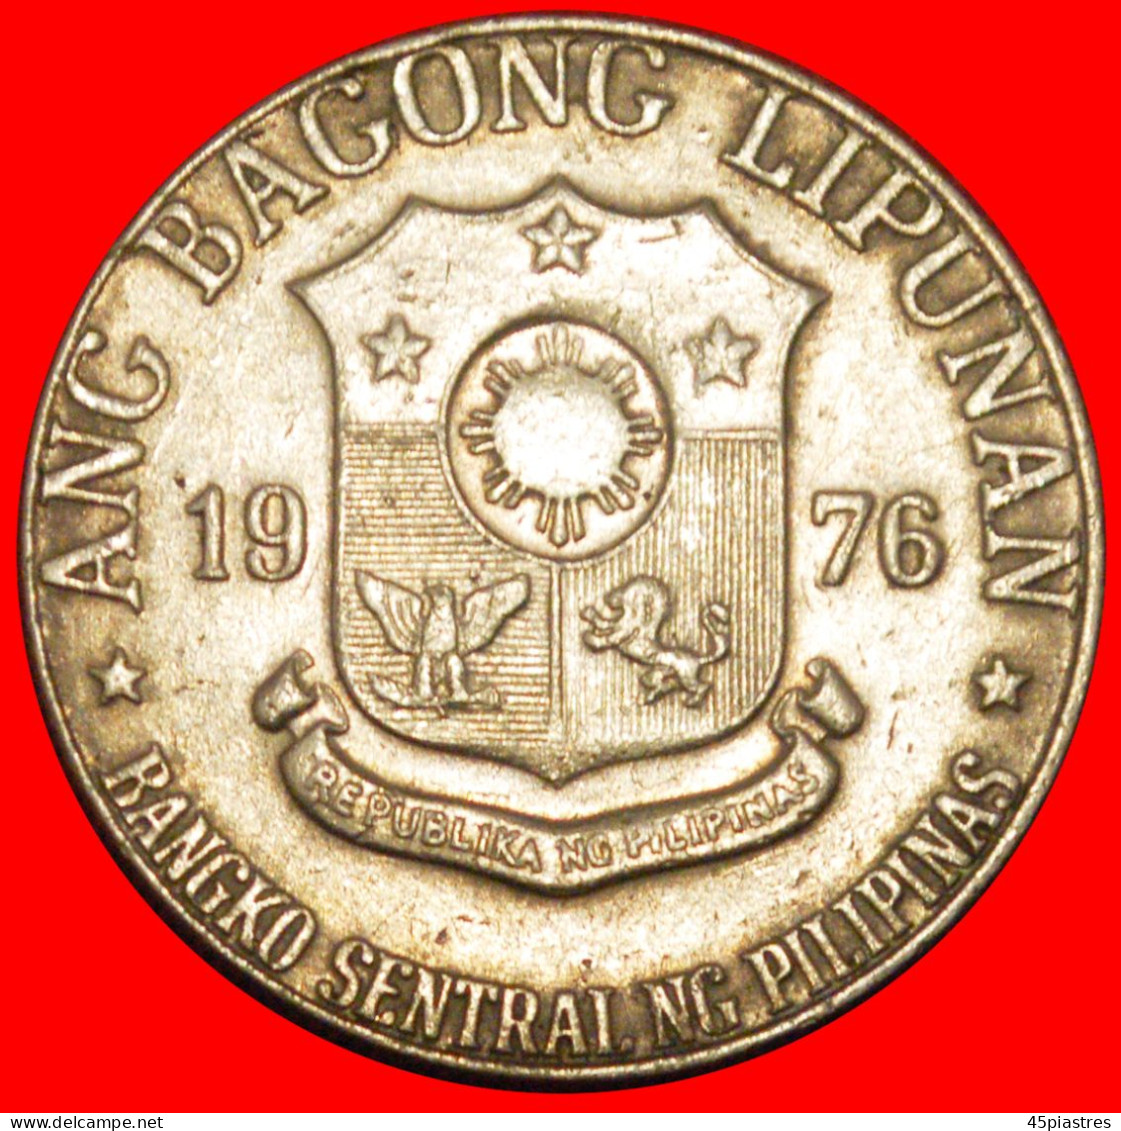 * USA JOSE RIZAL (1861-1896): PHILIPPINES  1 PISO 1976 LARGE TYPE 1975-1982! · LOW START ·  NO RESERVE! - Philippines